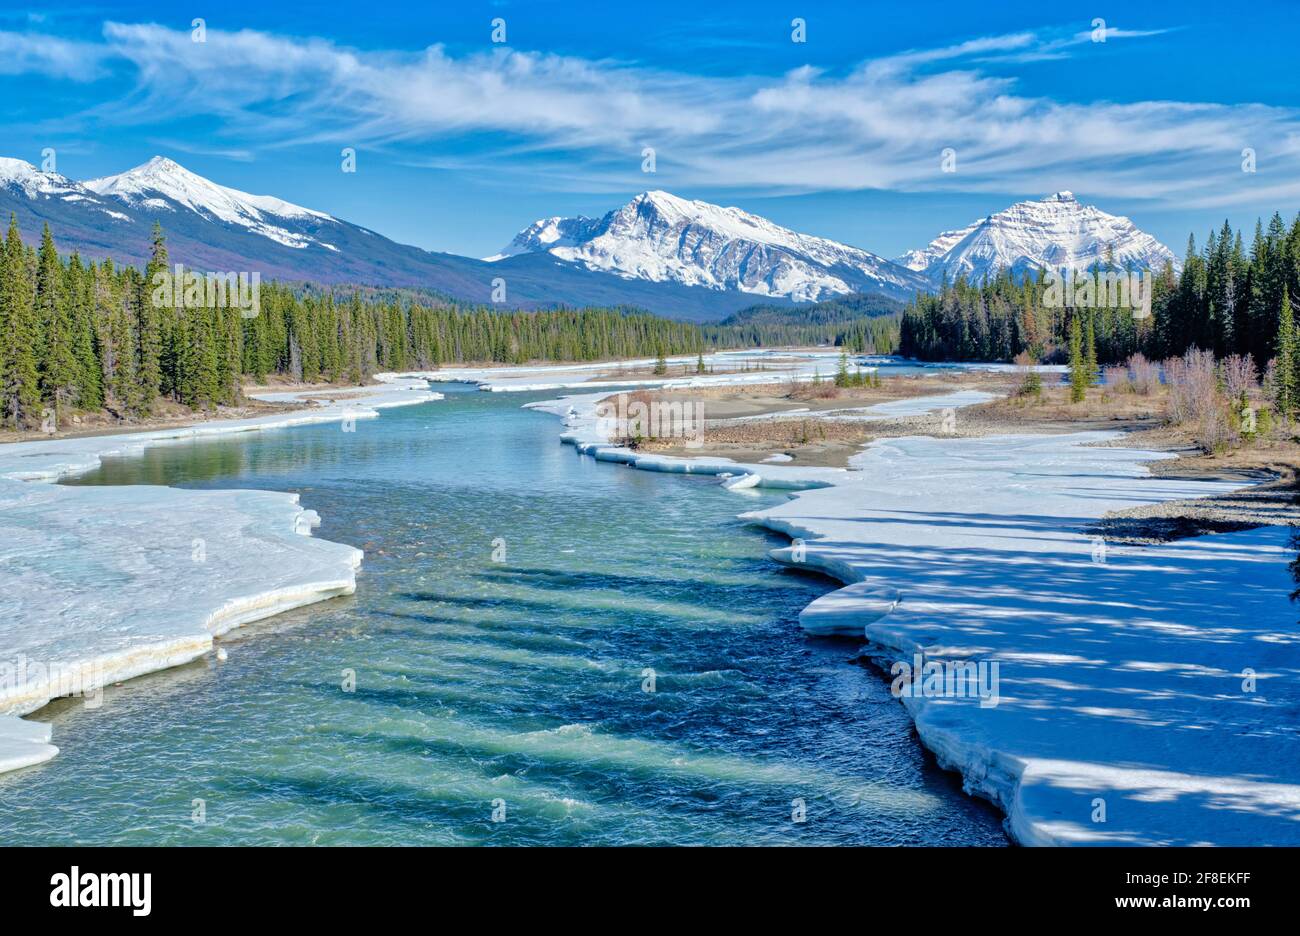 Saskatchewan River Crossing is a locality in western Alberta, Canada. It is located within Banff National Park at the junction of Highway 93 (Icefield Stock Photo